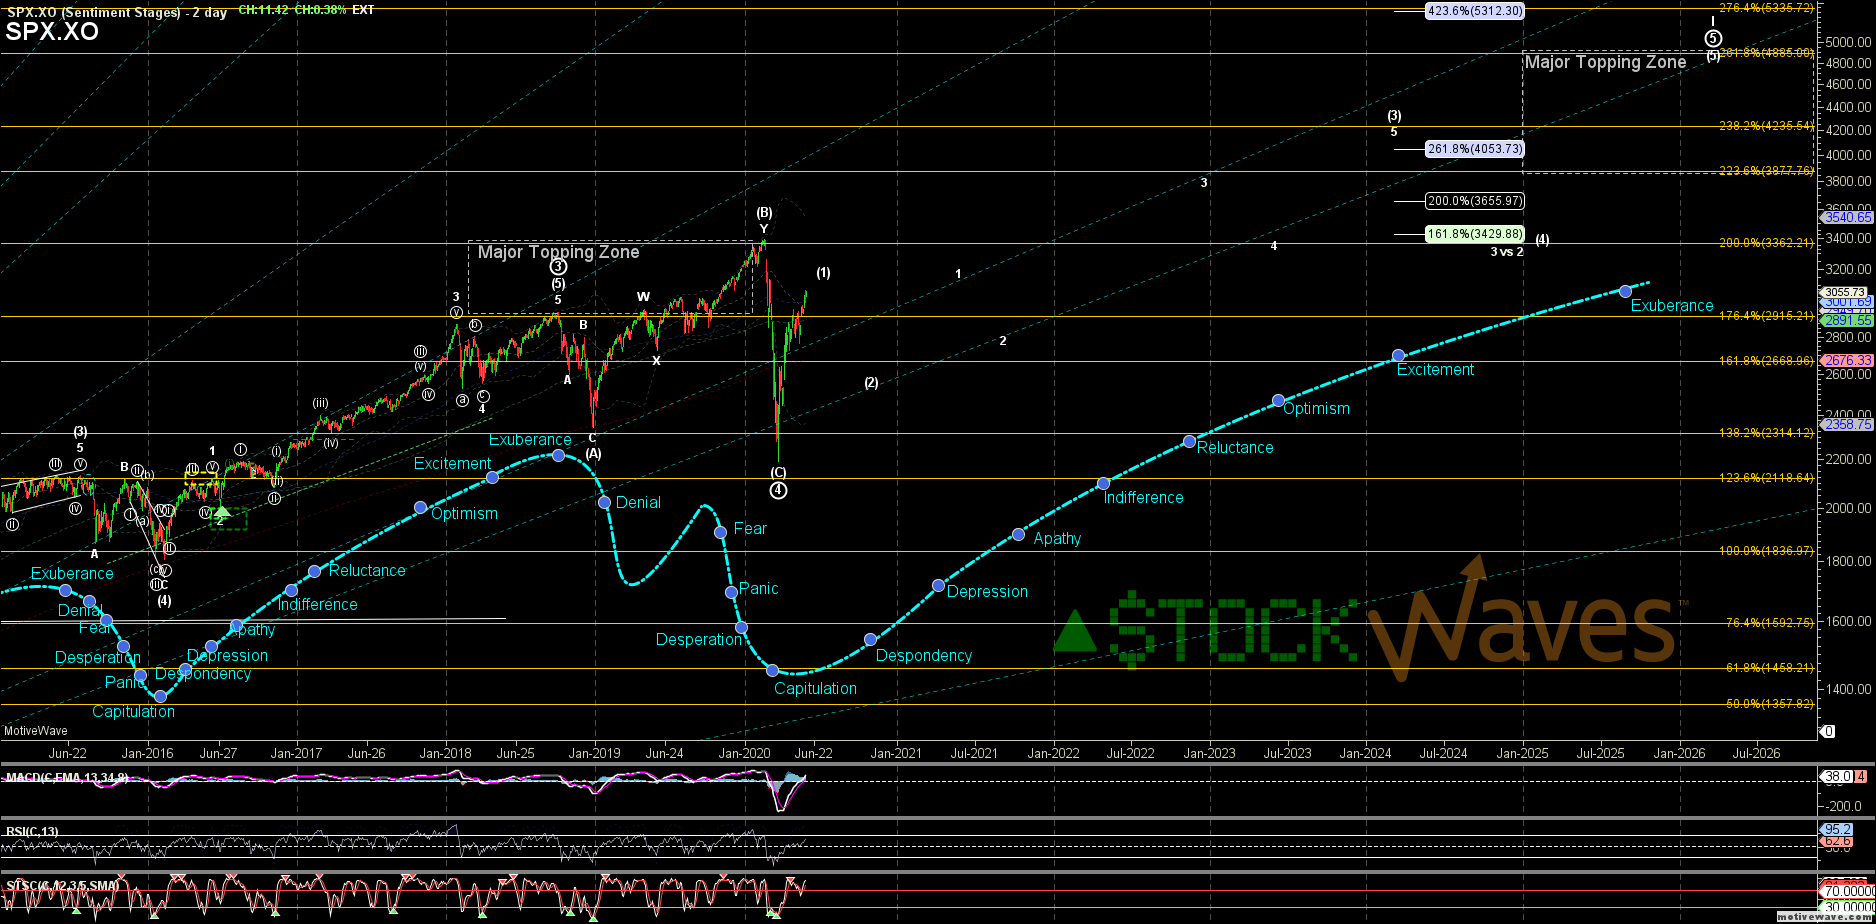 SPX.XO - Sentiment Stages - Jun-01 2034 PM (2 day)